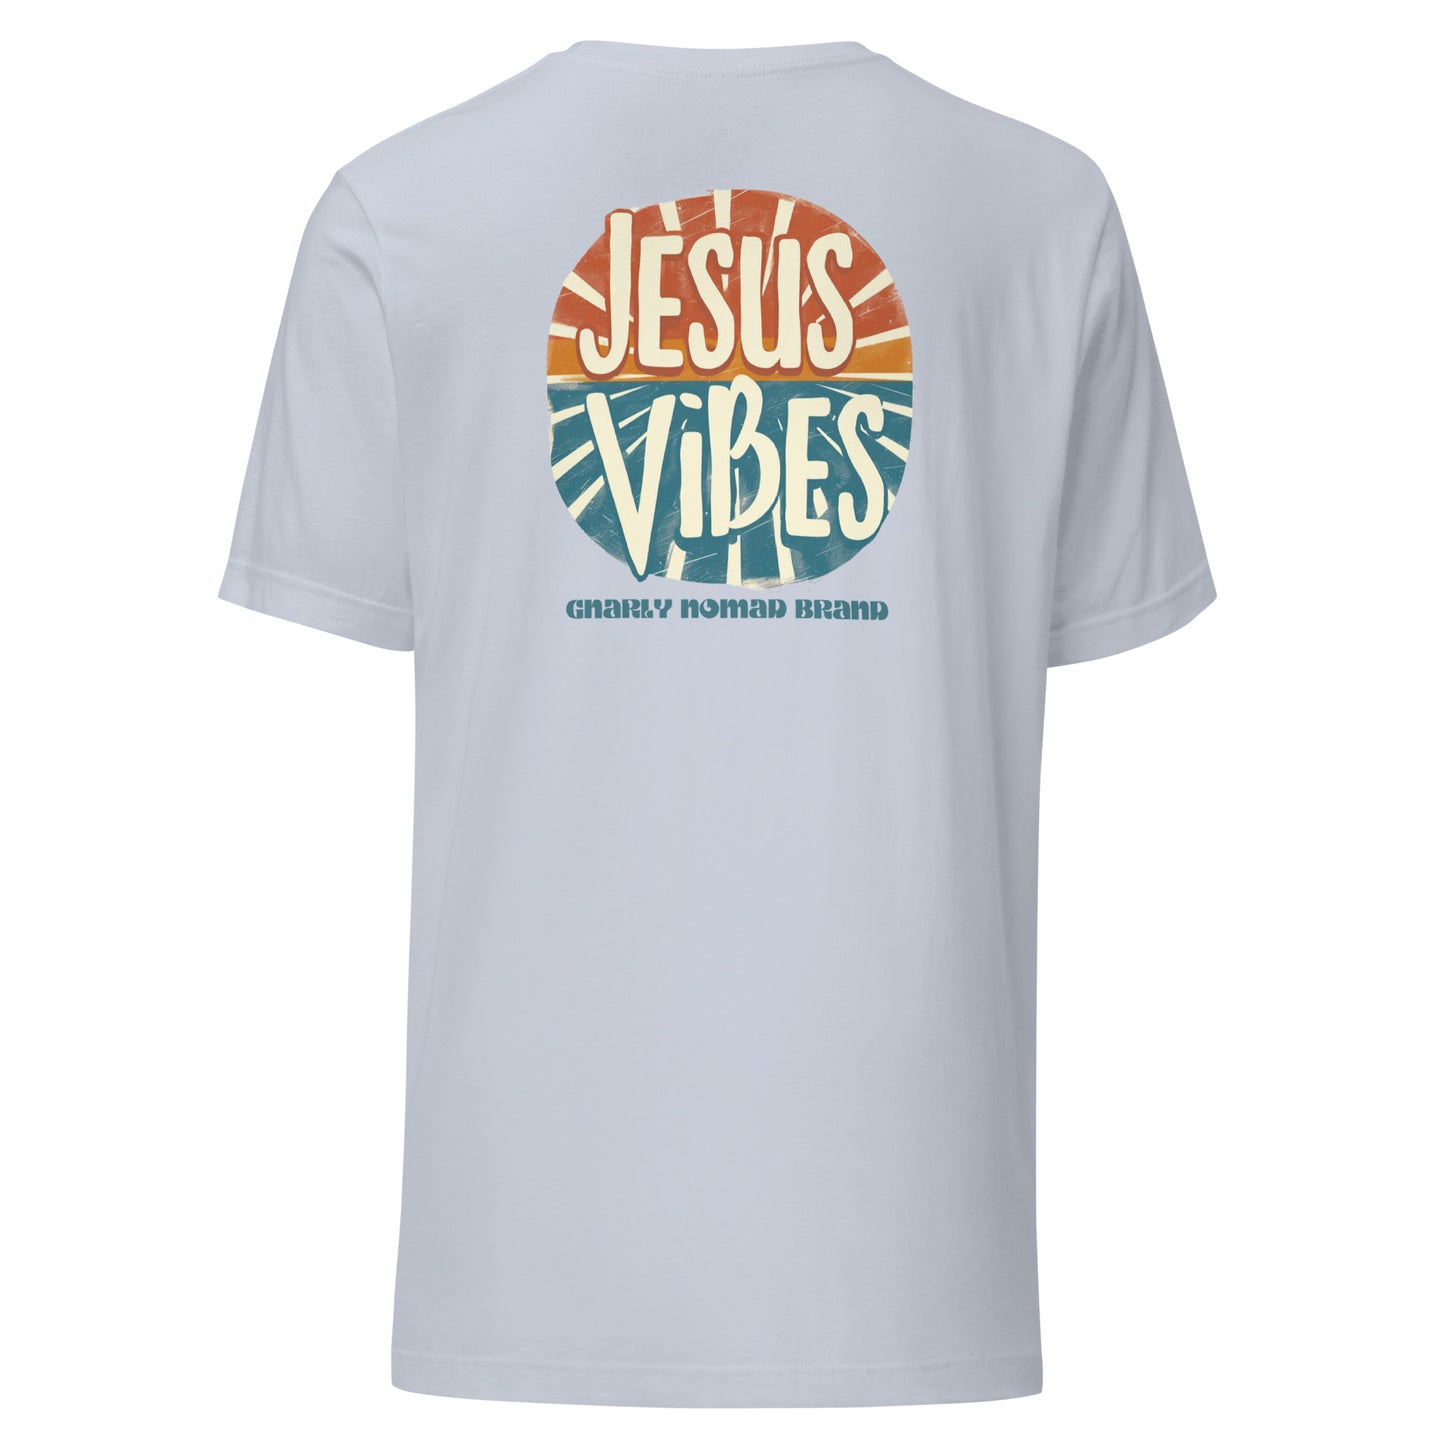 Jesus Vibes (back) with Logo (front)